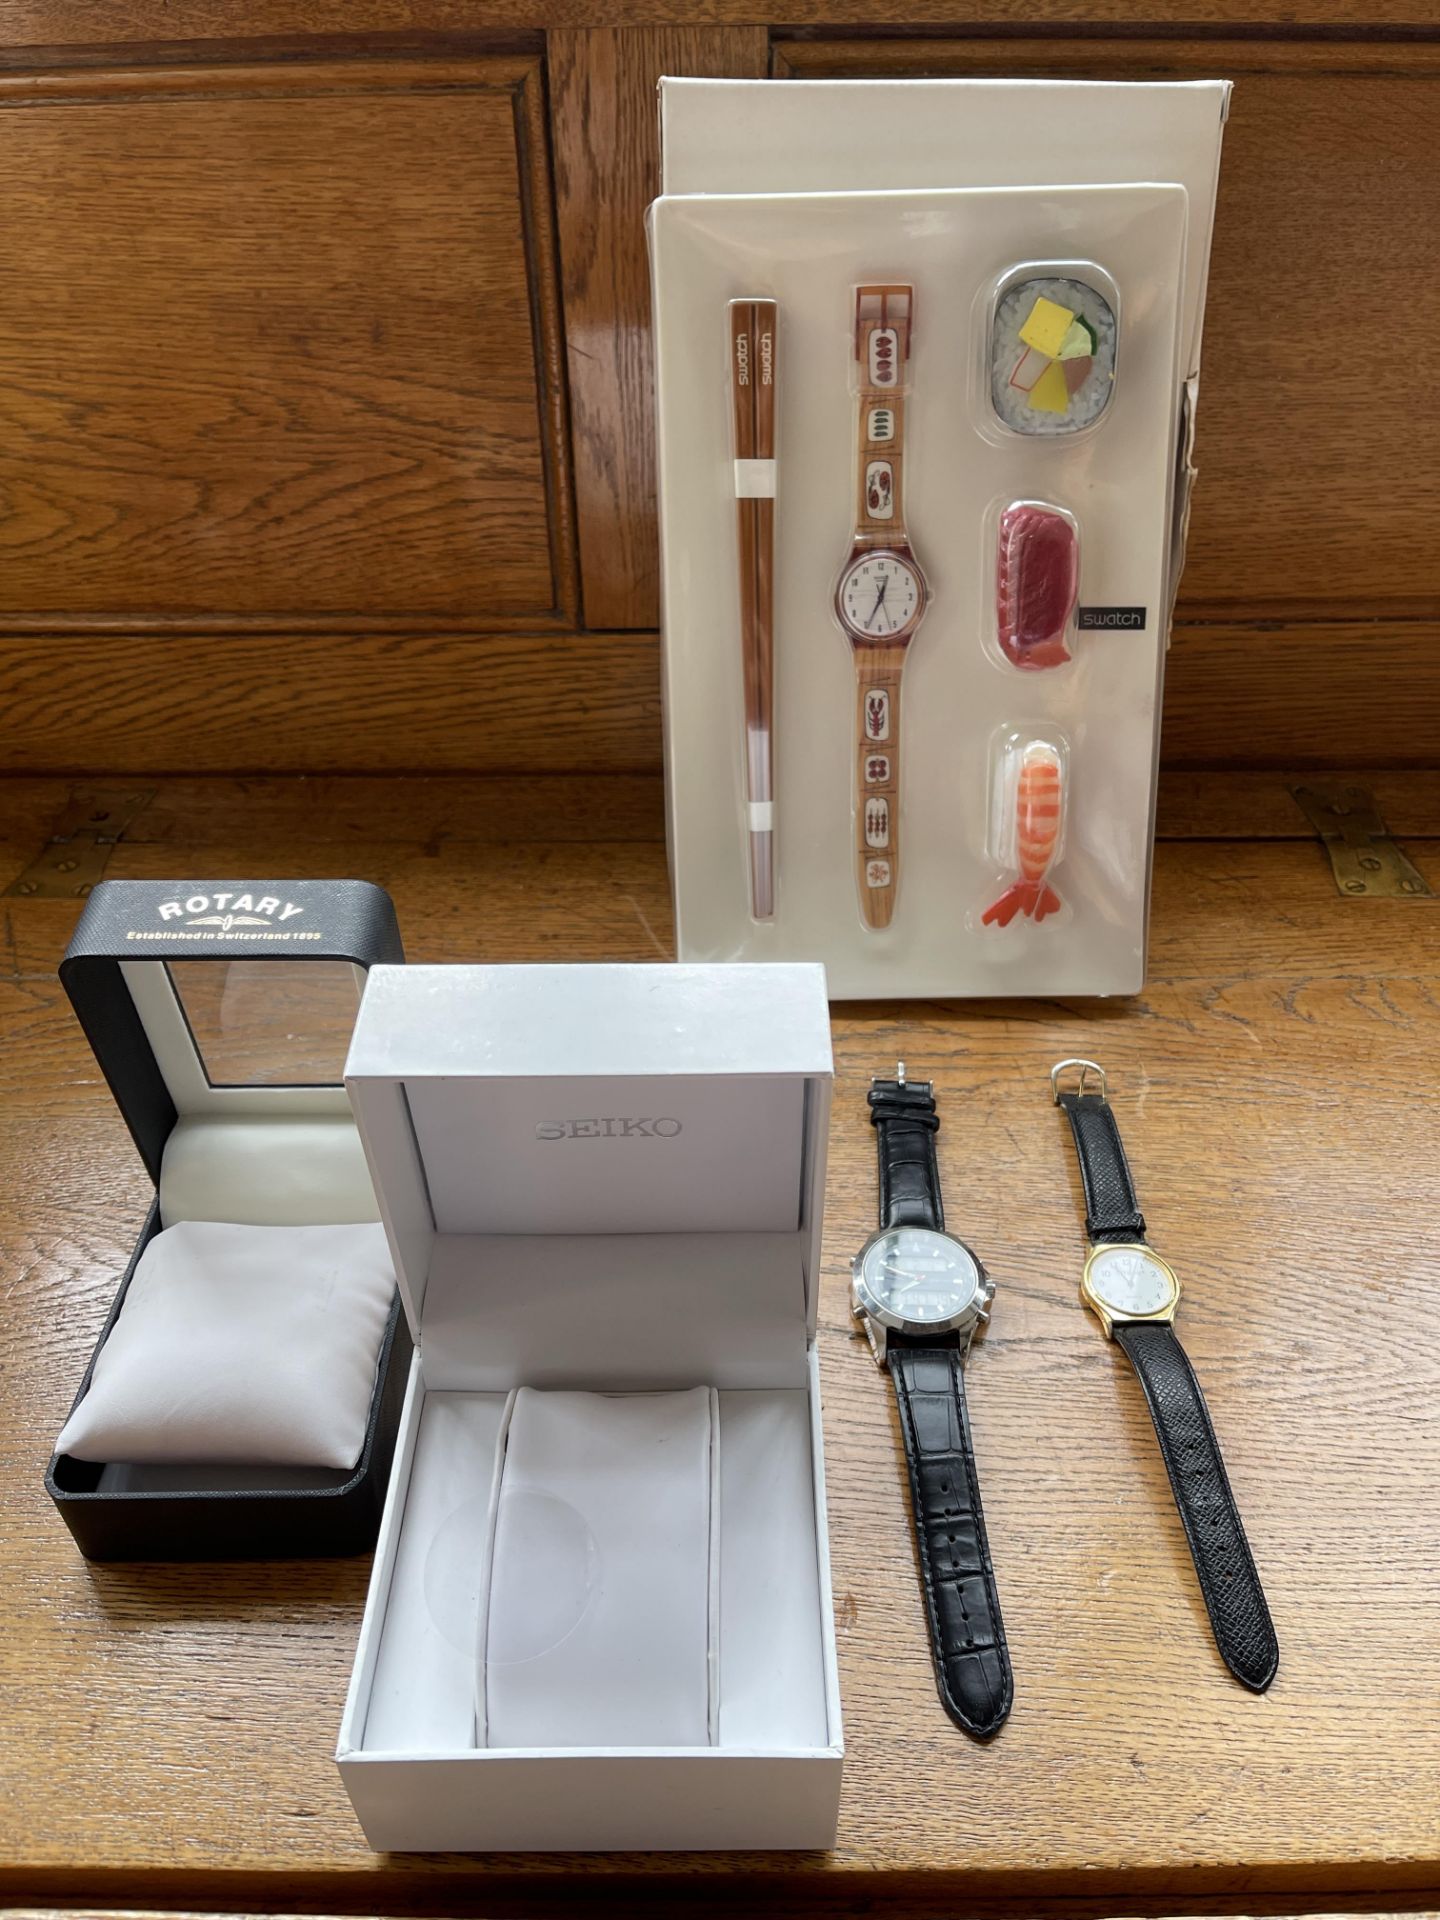 LOT OF WATCHES, BRAND NEW SEALED SUSHI PLATE SWATCH WATCH IN BOX - Image 3 of 3